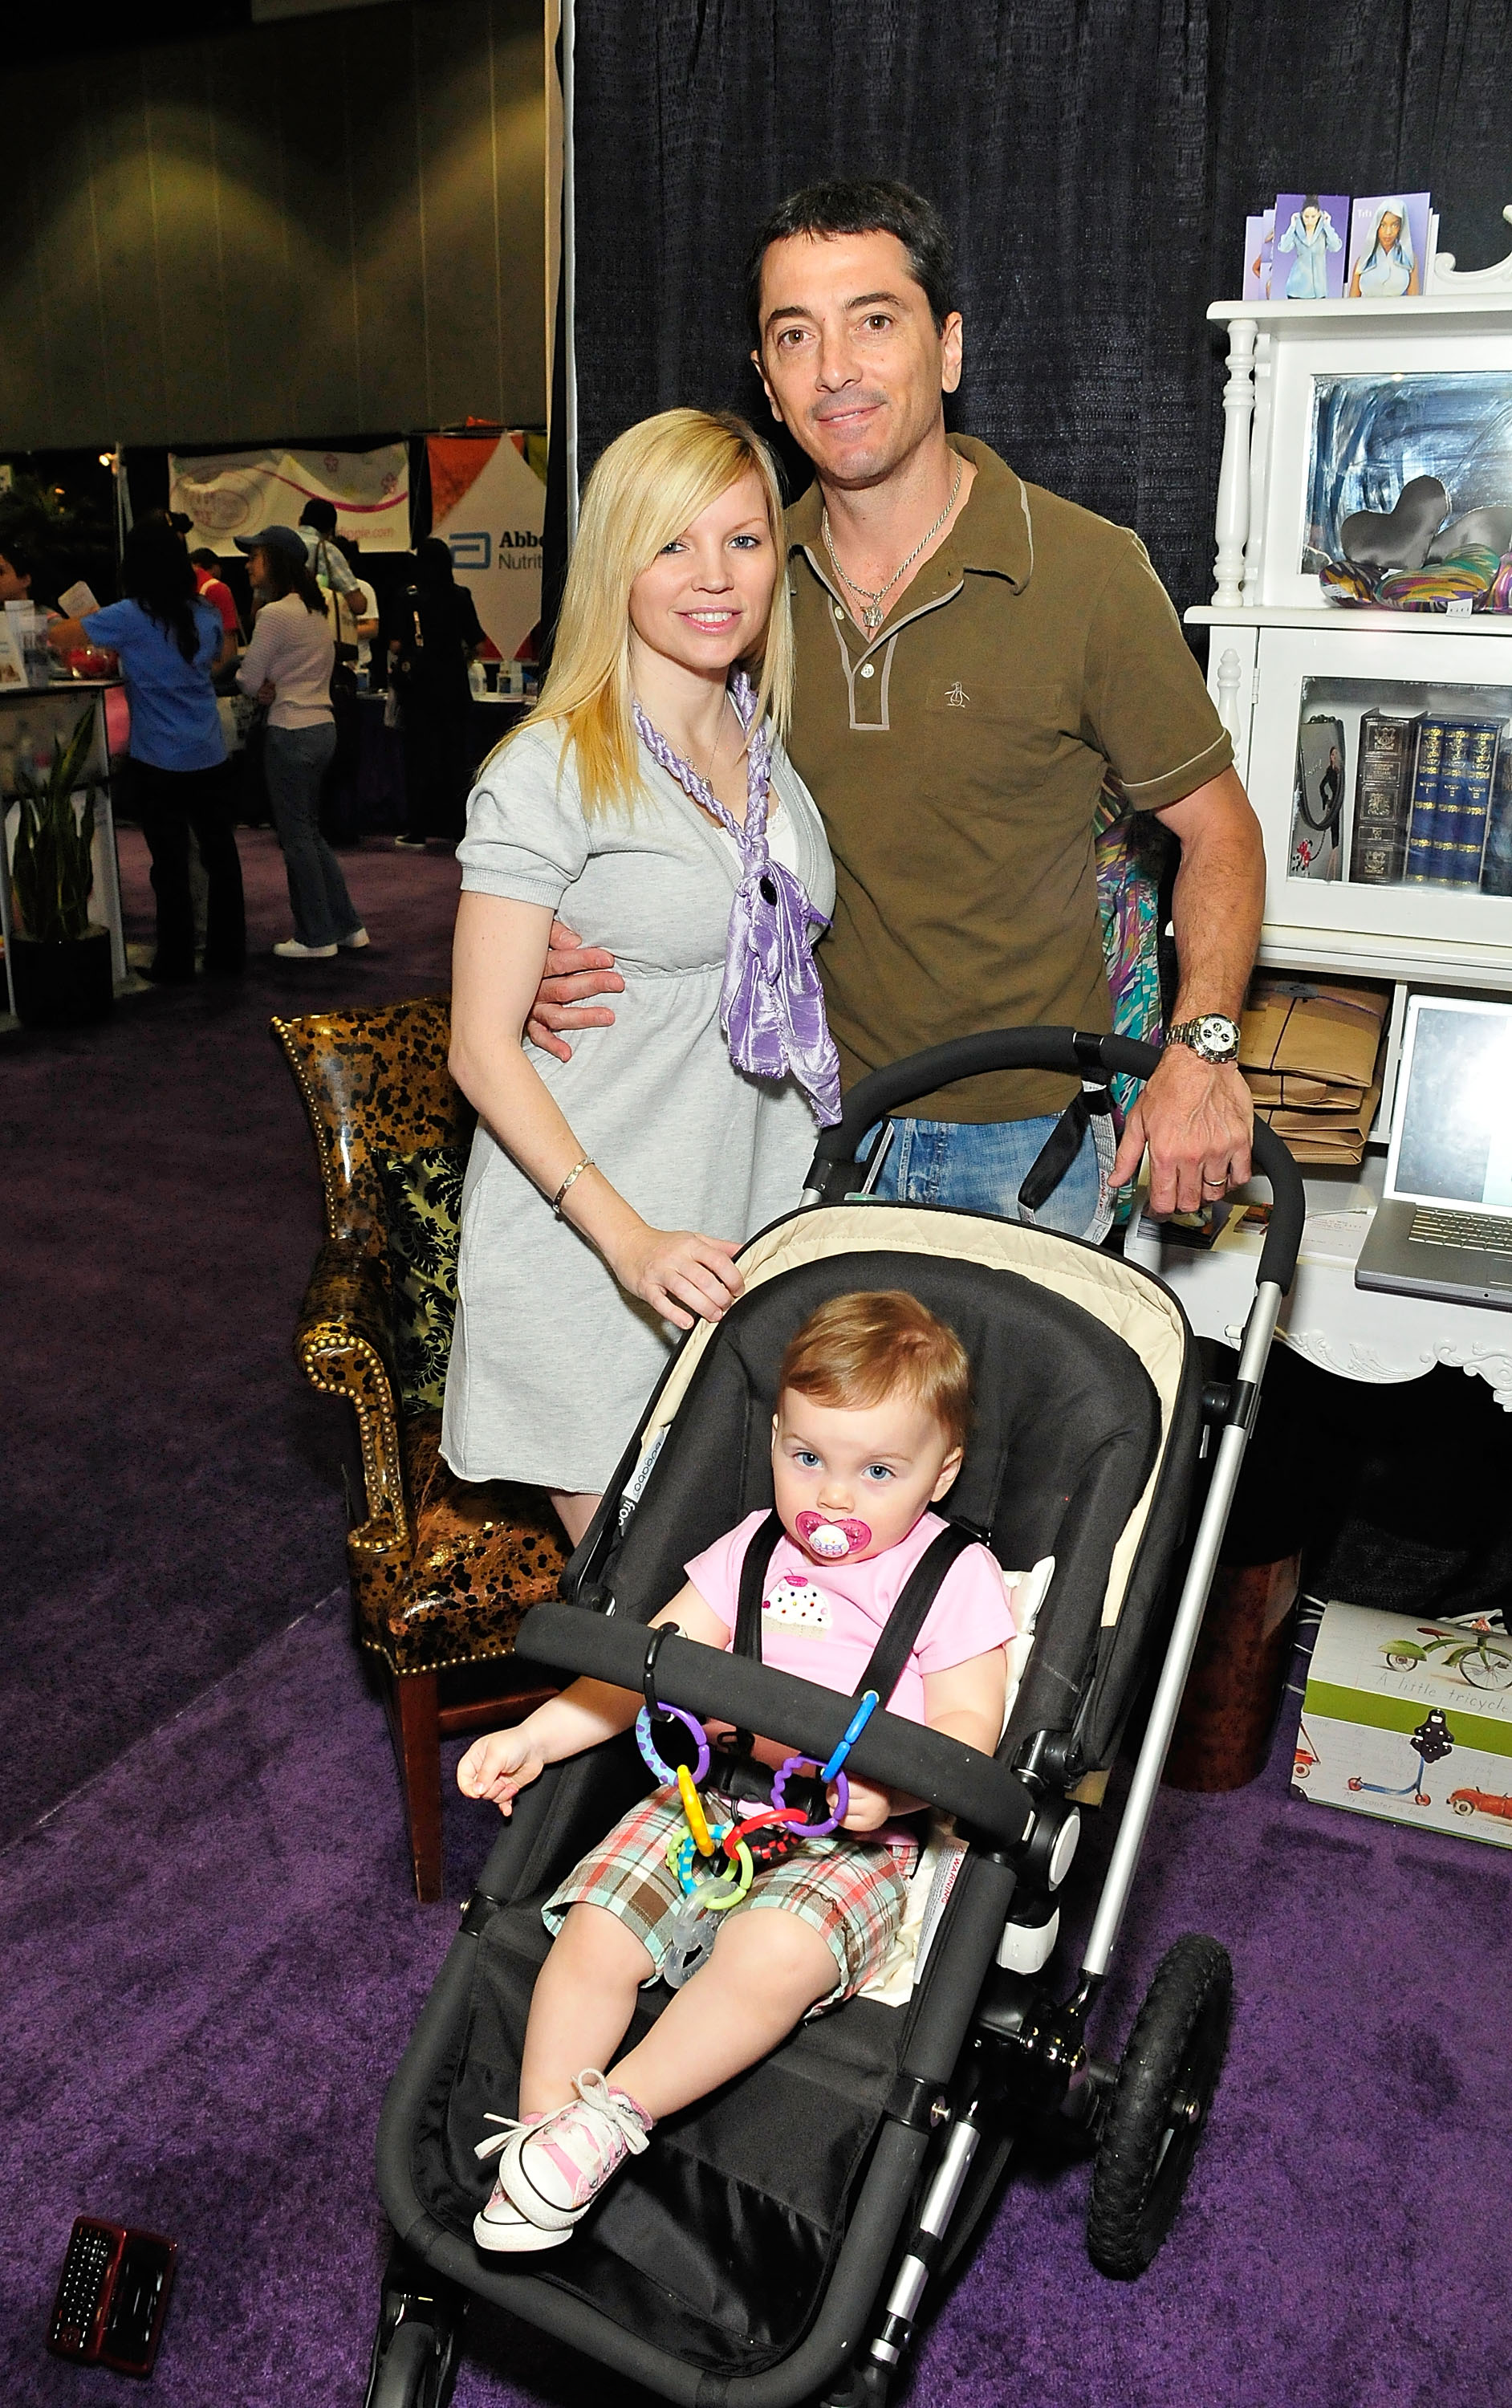 Actor Scott Baio and wife Renee Sloan pose with daughter Bailey at the Baby & Tween Celebration trade show, held at the Los Angeles Convention Center on April 26, 2009 in Los Angeles, California. | Source: Getty Images